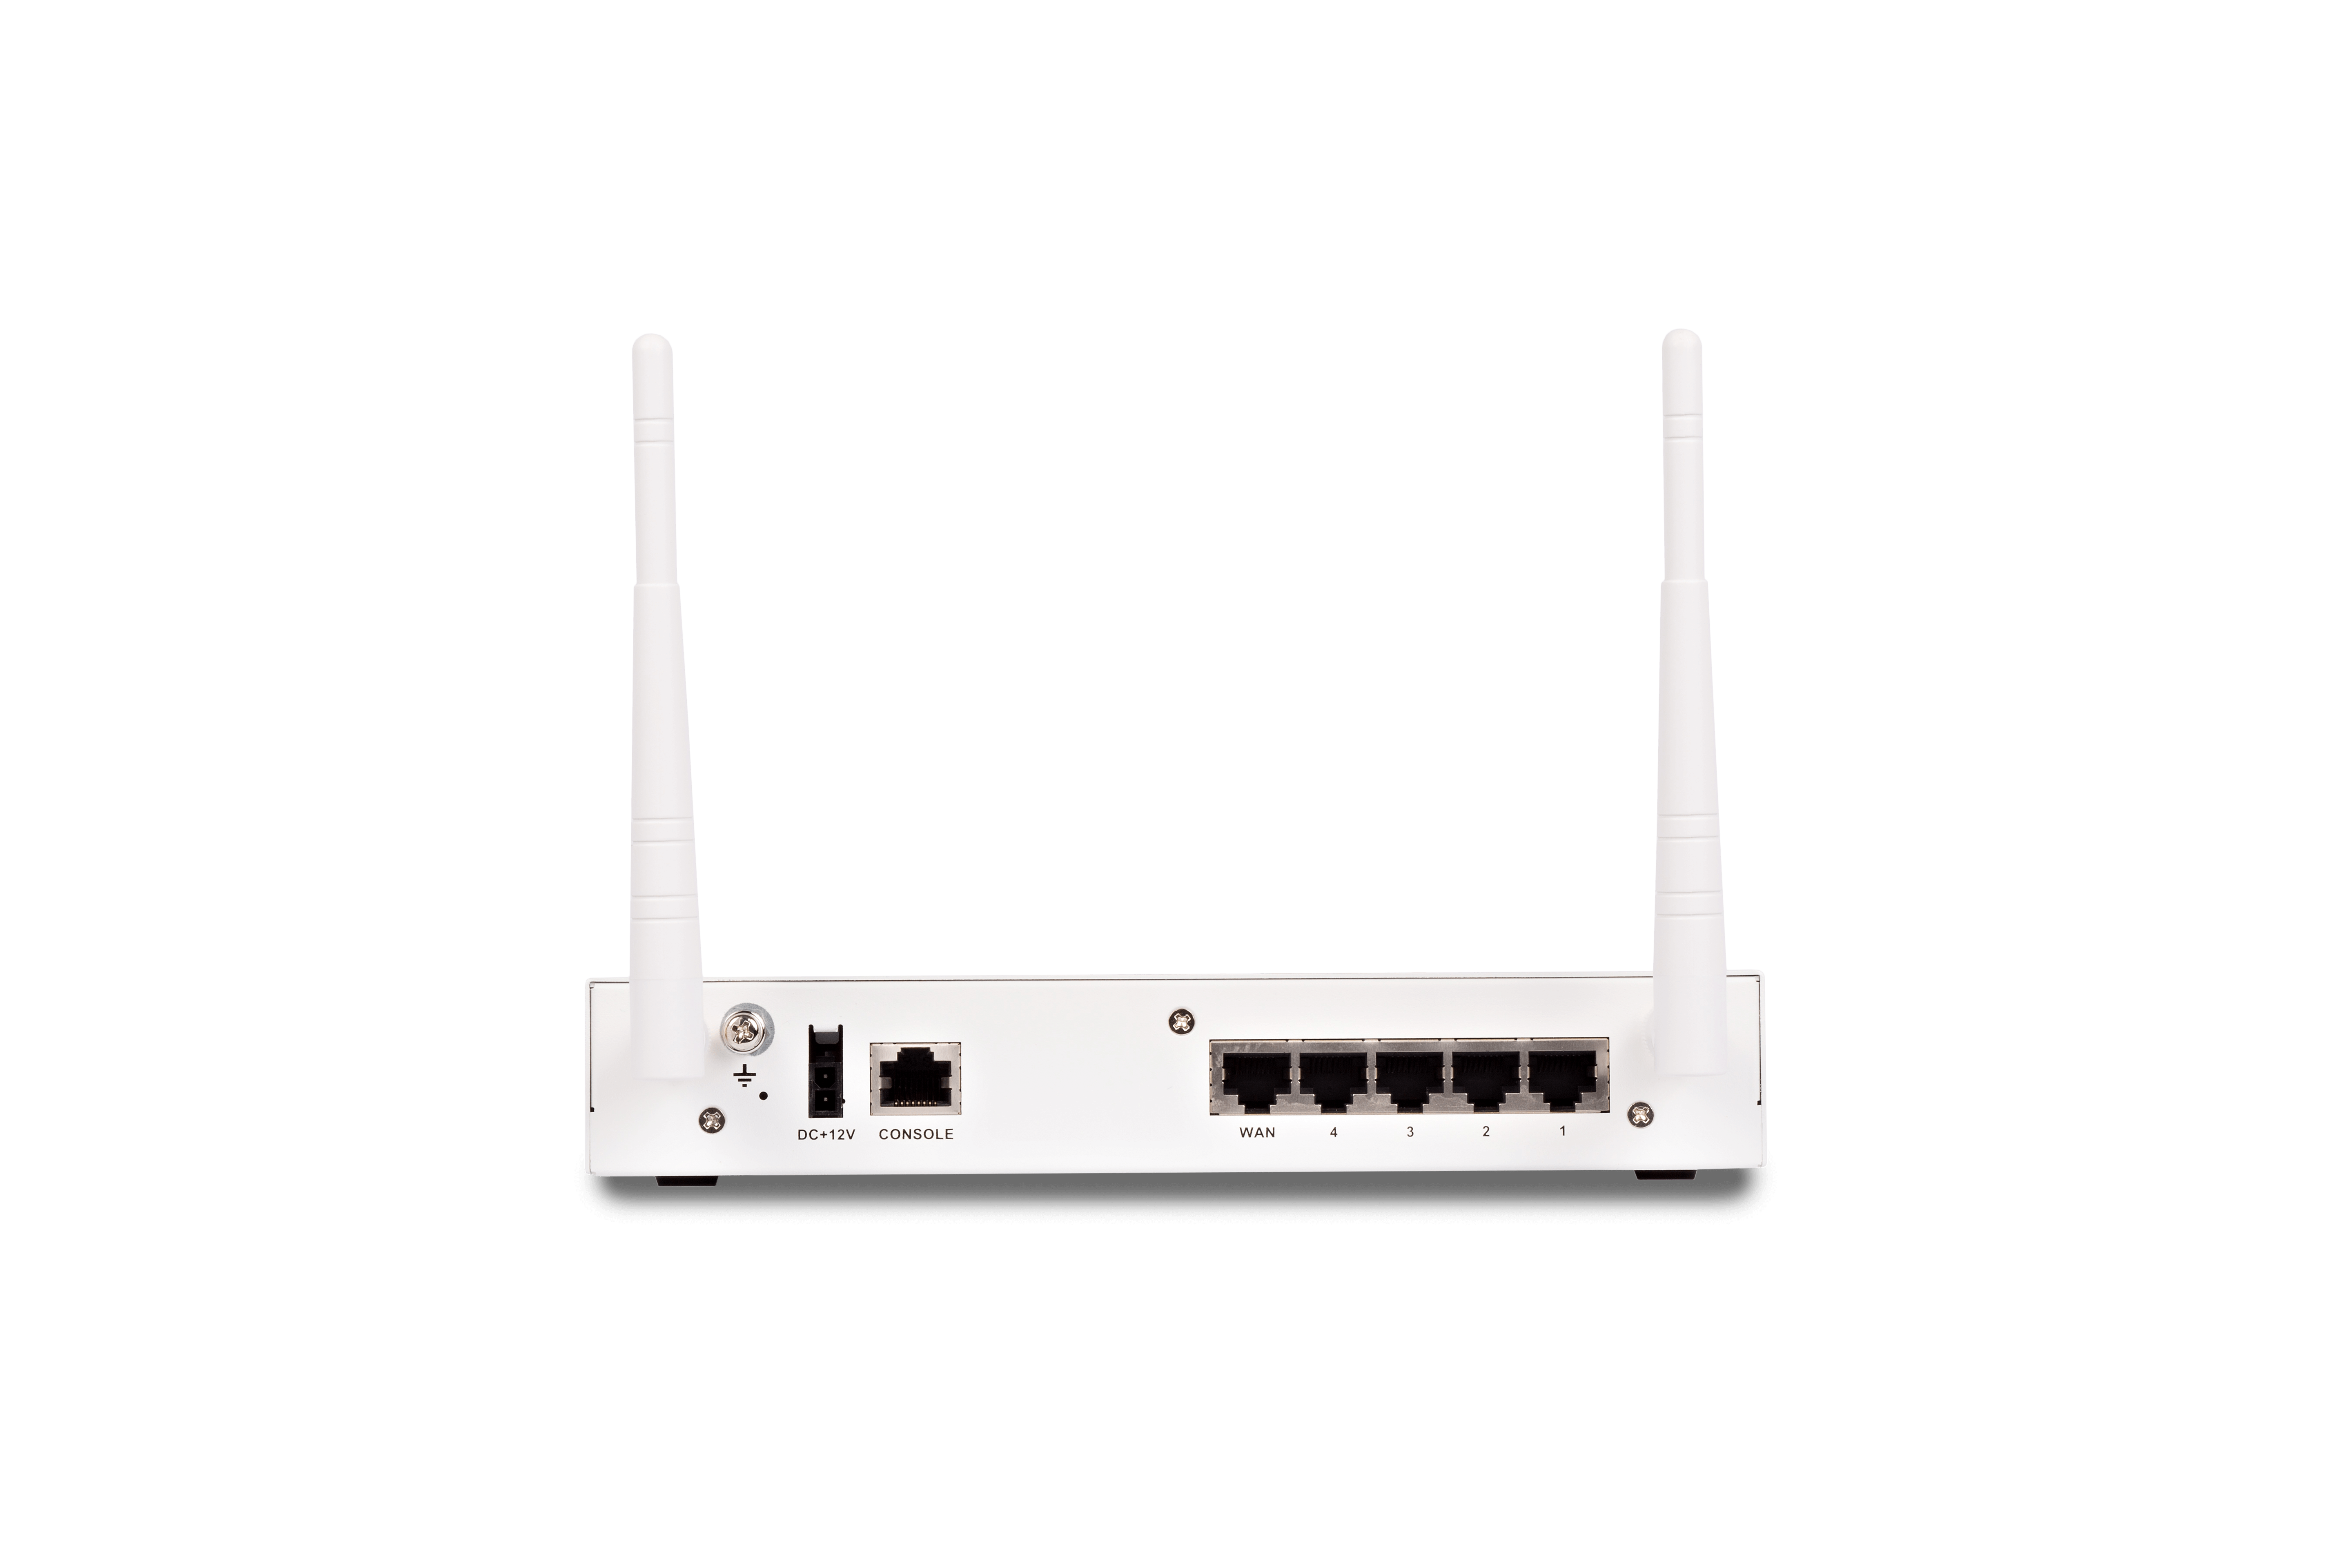 Fortinet FortiWiFi-30E - UTM/UTP Bundle (End of Sale/Life)